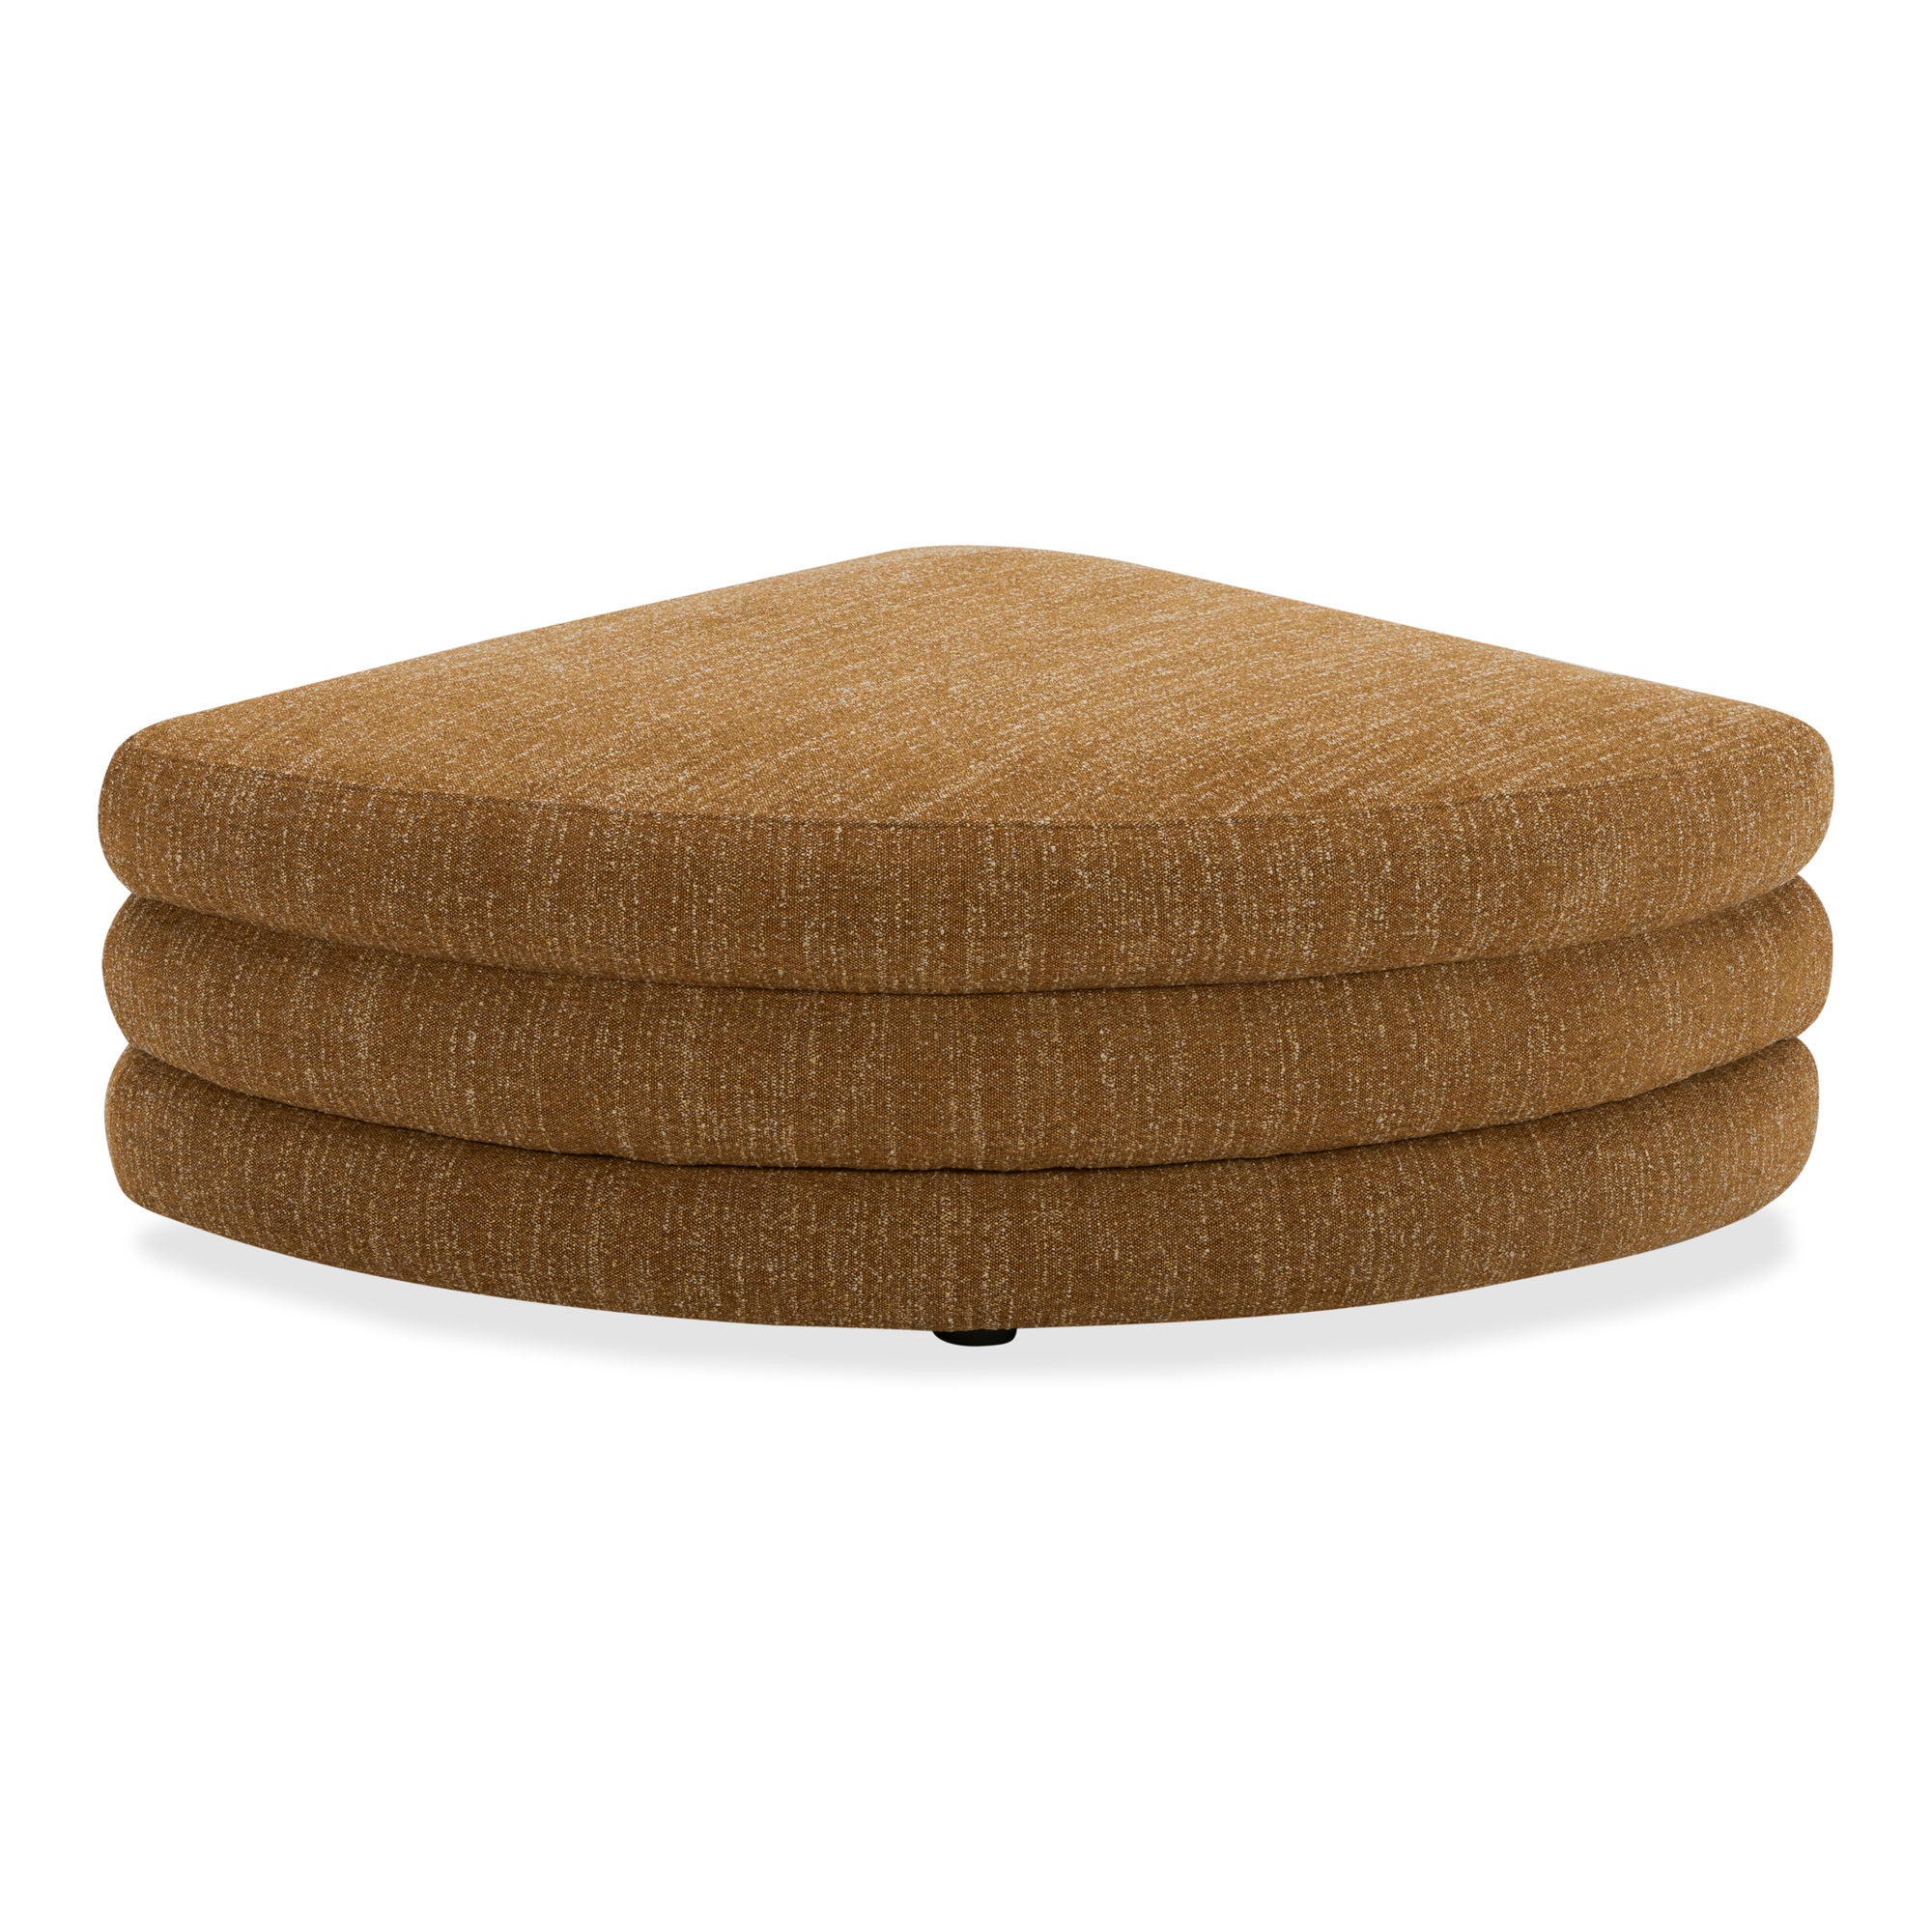 Lowtide - Curved Ottoman - Light Brown